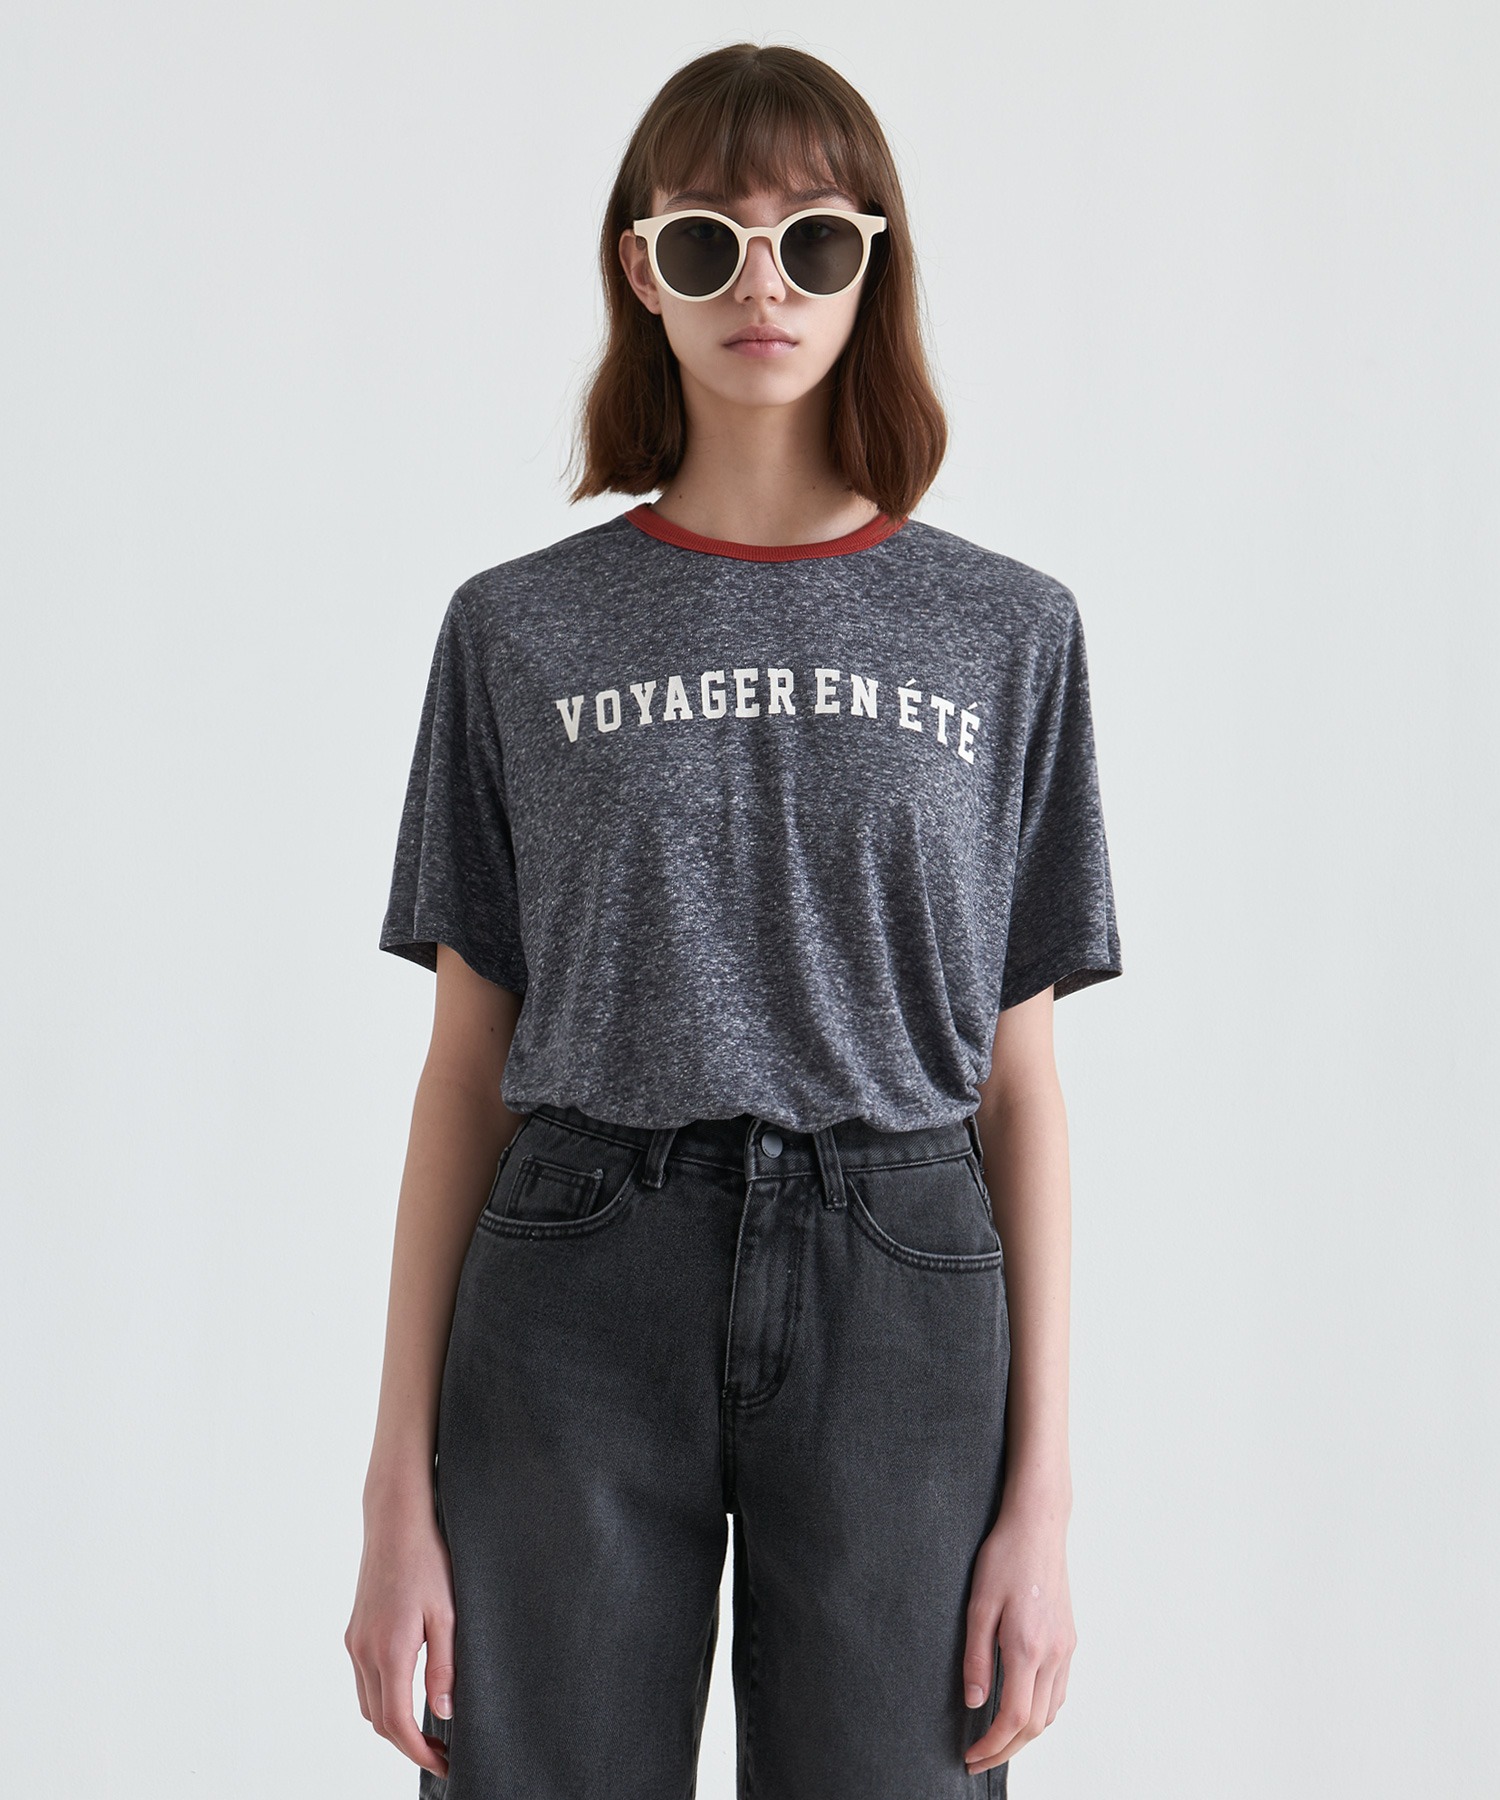 Boyage in Summer Top (Charcoal)